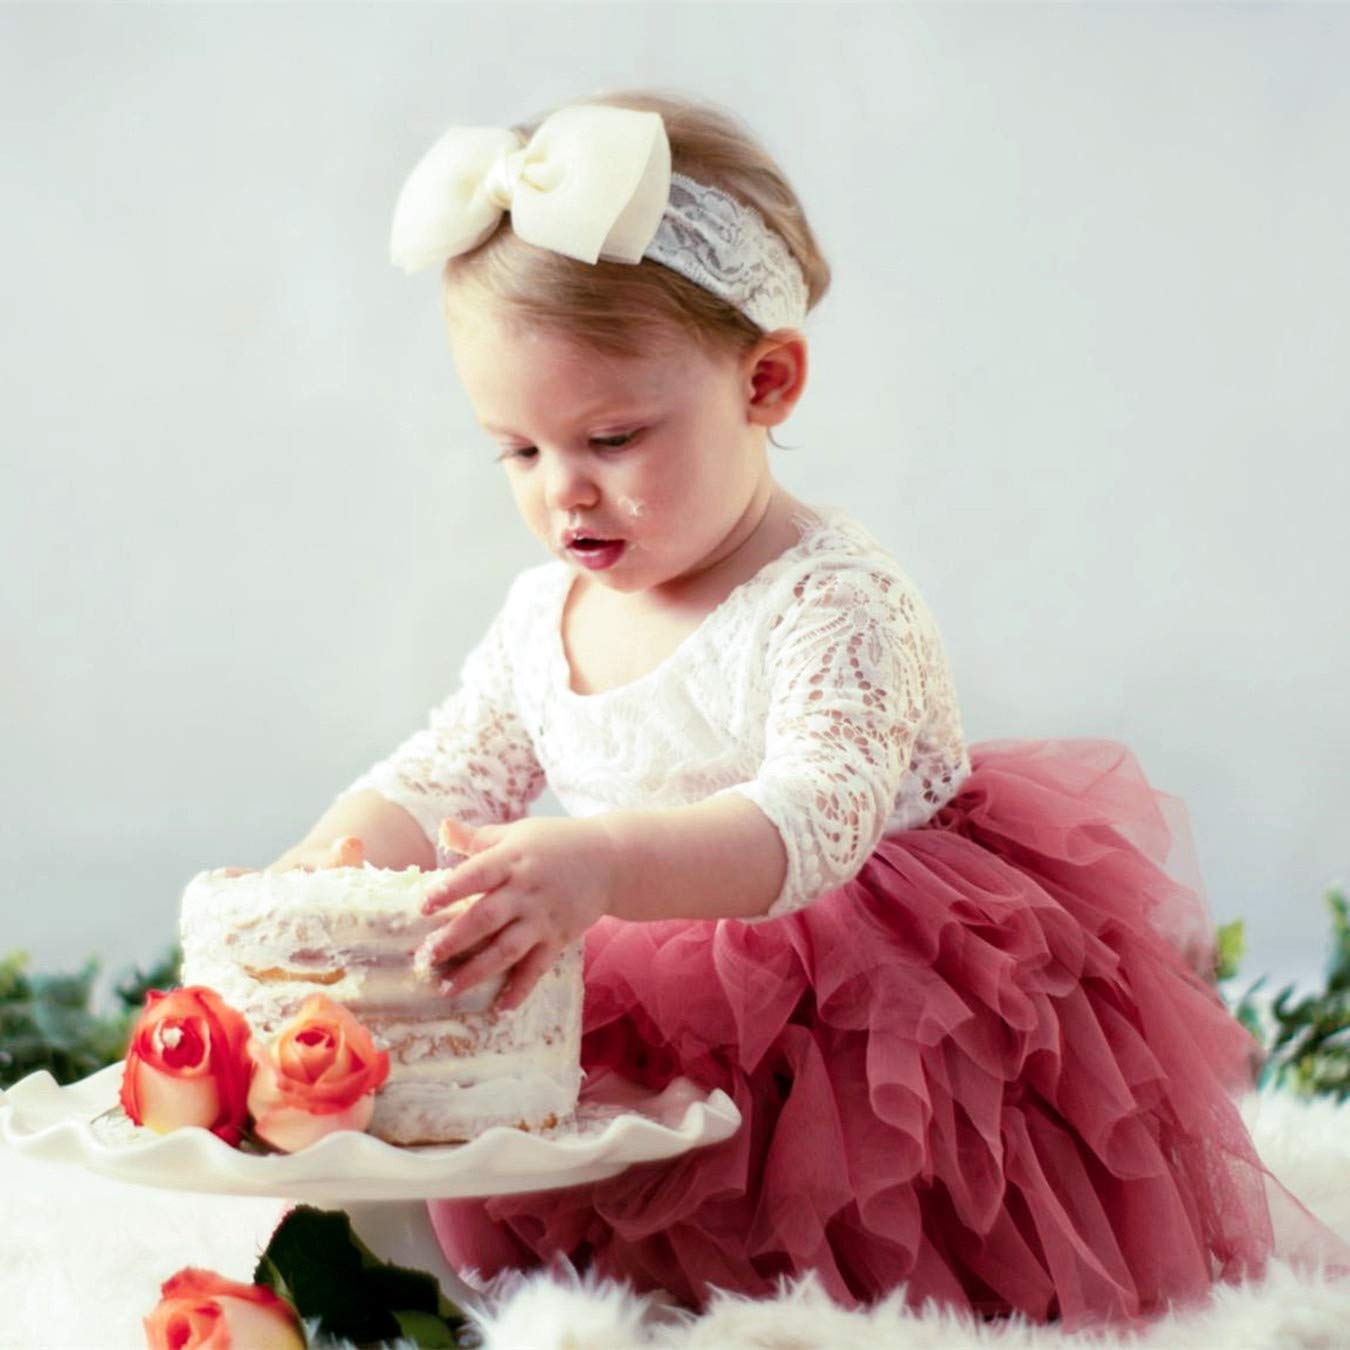 2Bunnies Flower Girl Dress Peony Lace Back A-Line Long Sleeve Tiered Tulle Short (Dusty Pink) - 2BUNNIES